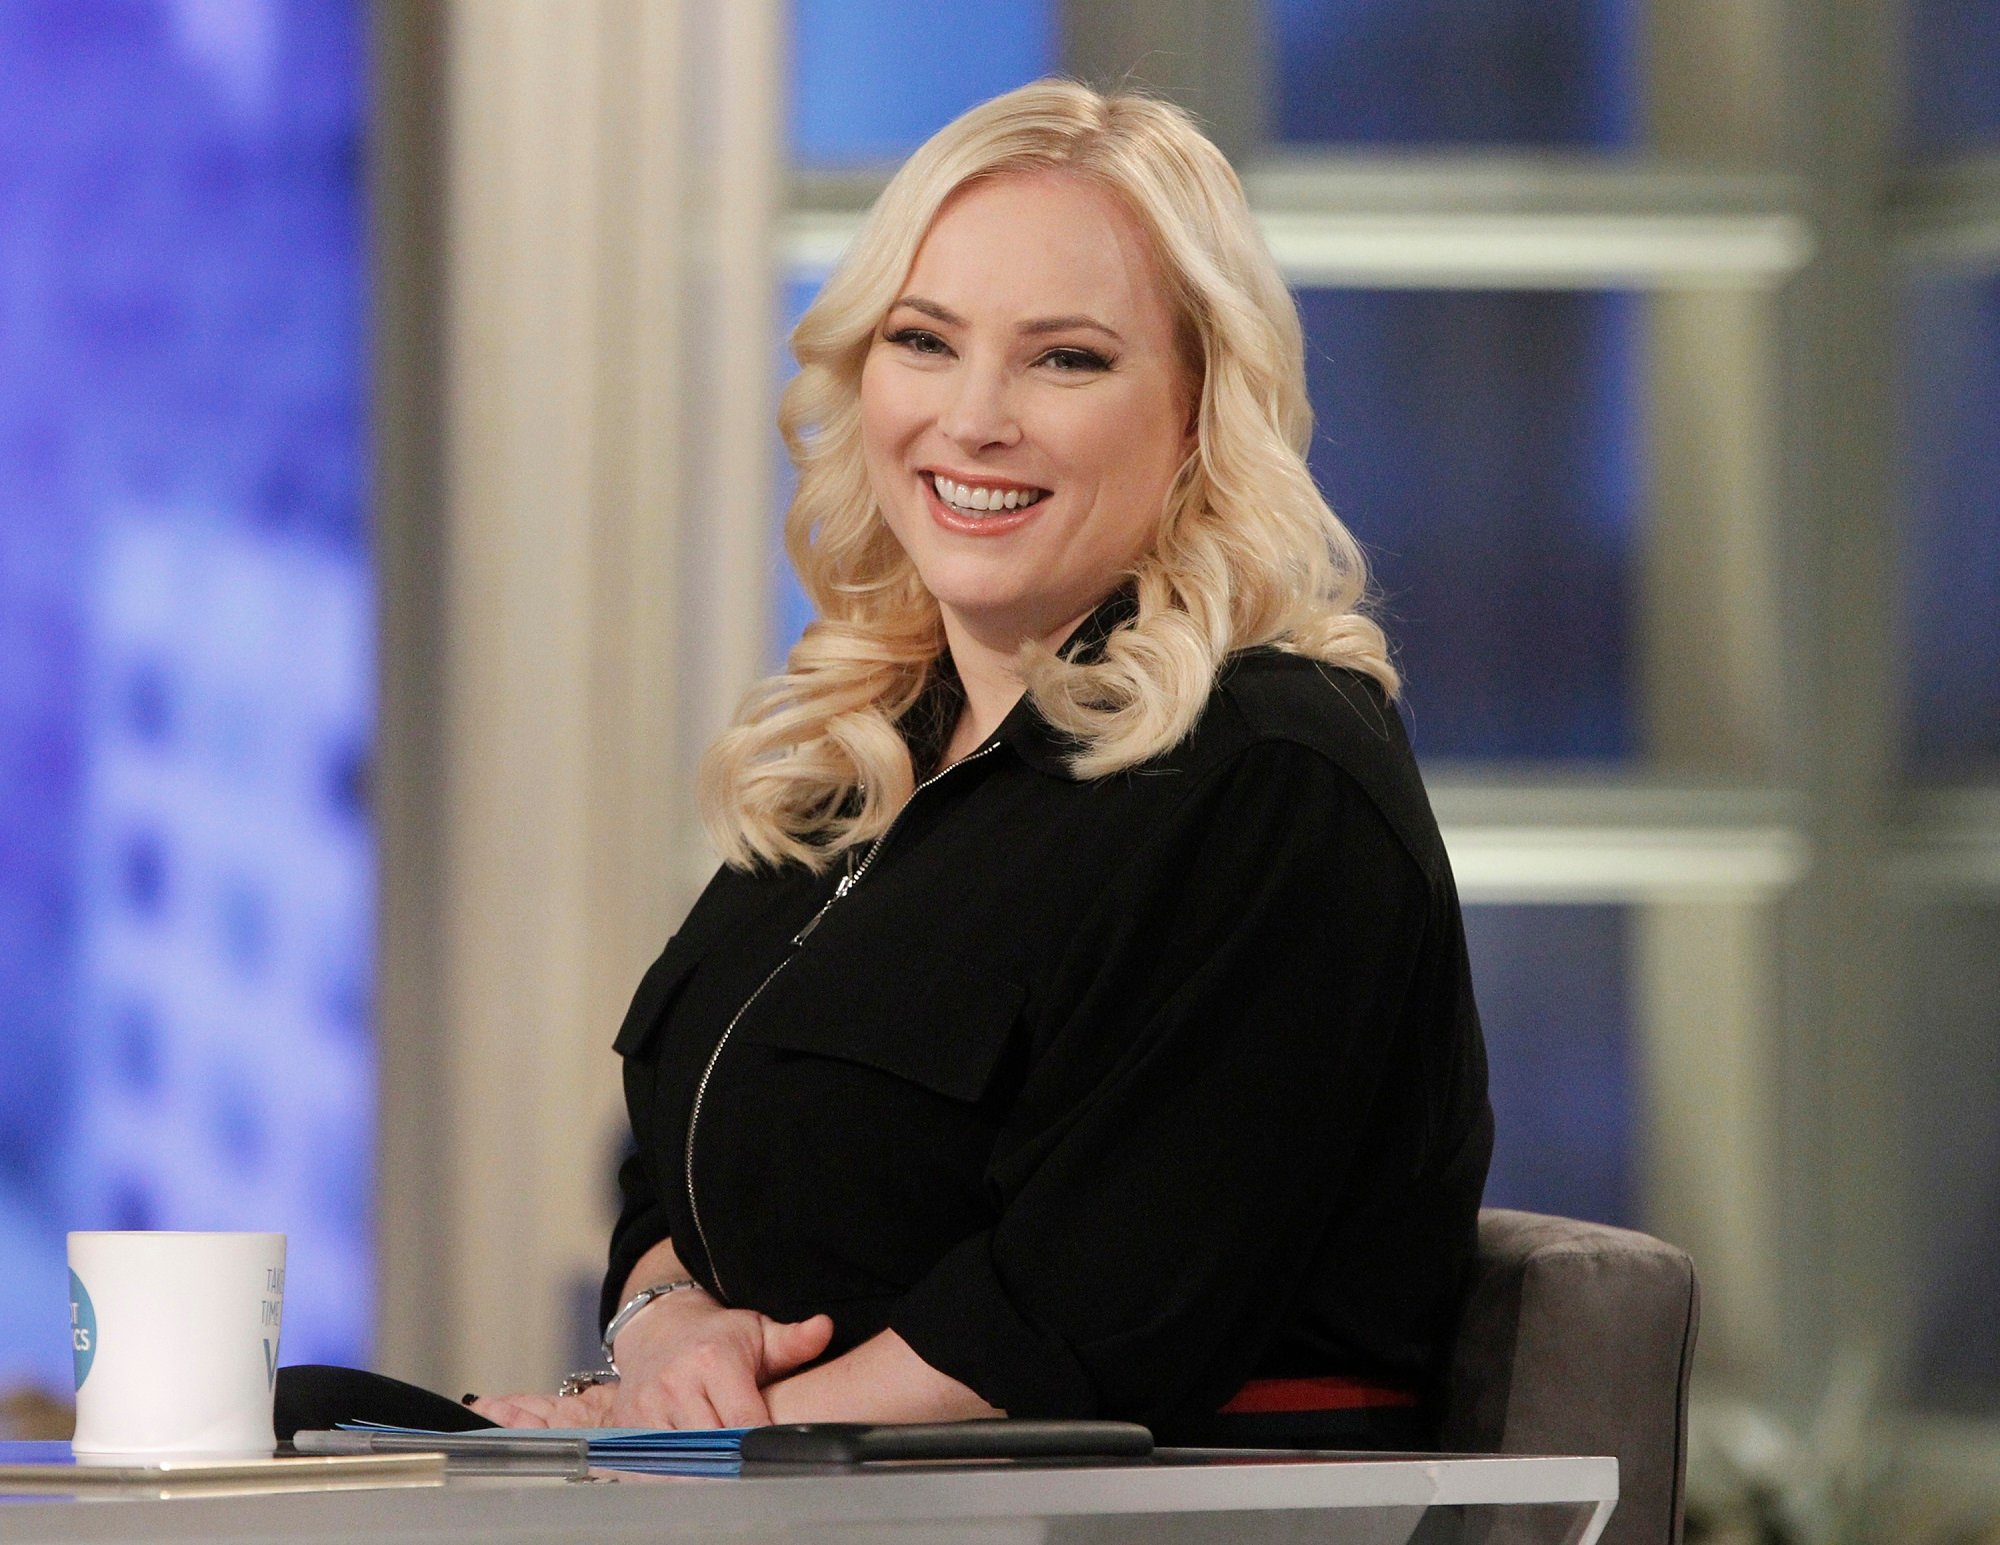 'The View' co-host Meghan McCain smiling while sitting at the Hot Topic table